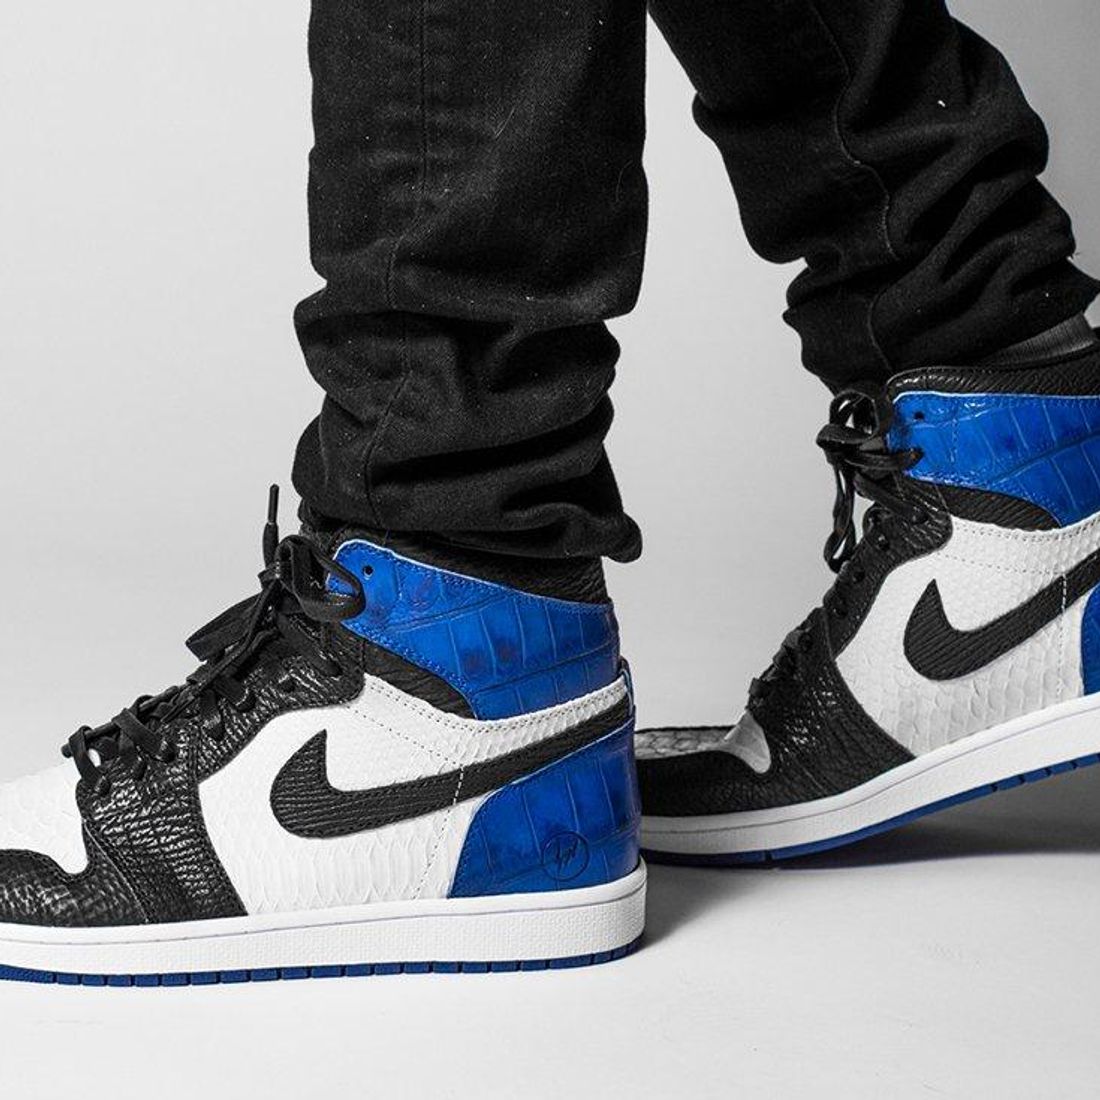 009 - An on-foot look at The Shoe Surgeon s custom Lux Fragment Air Jordan  1